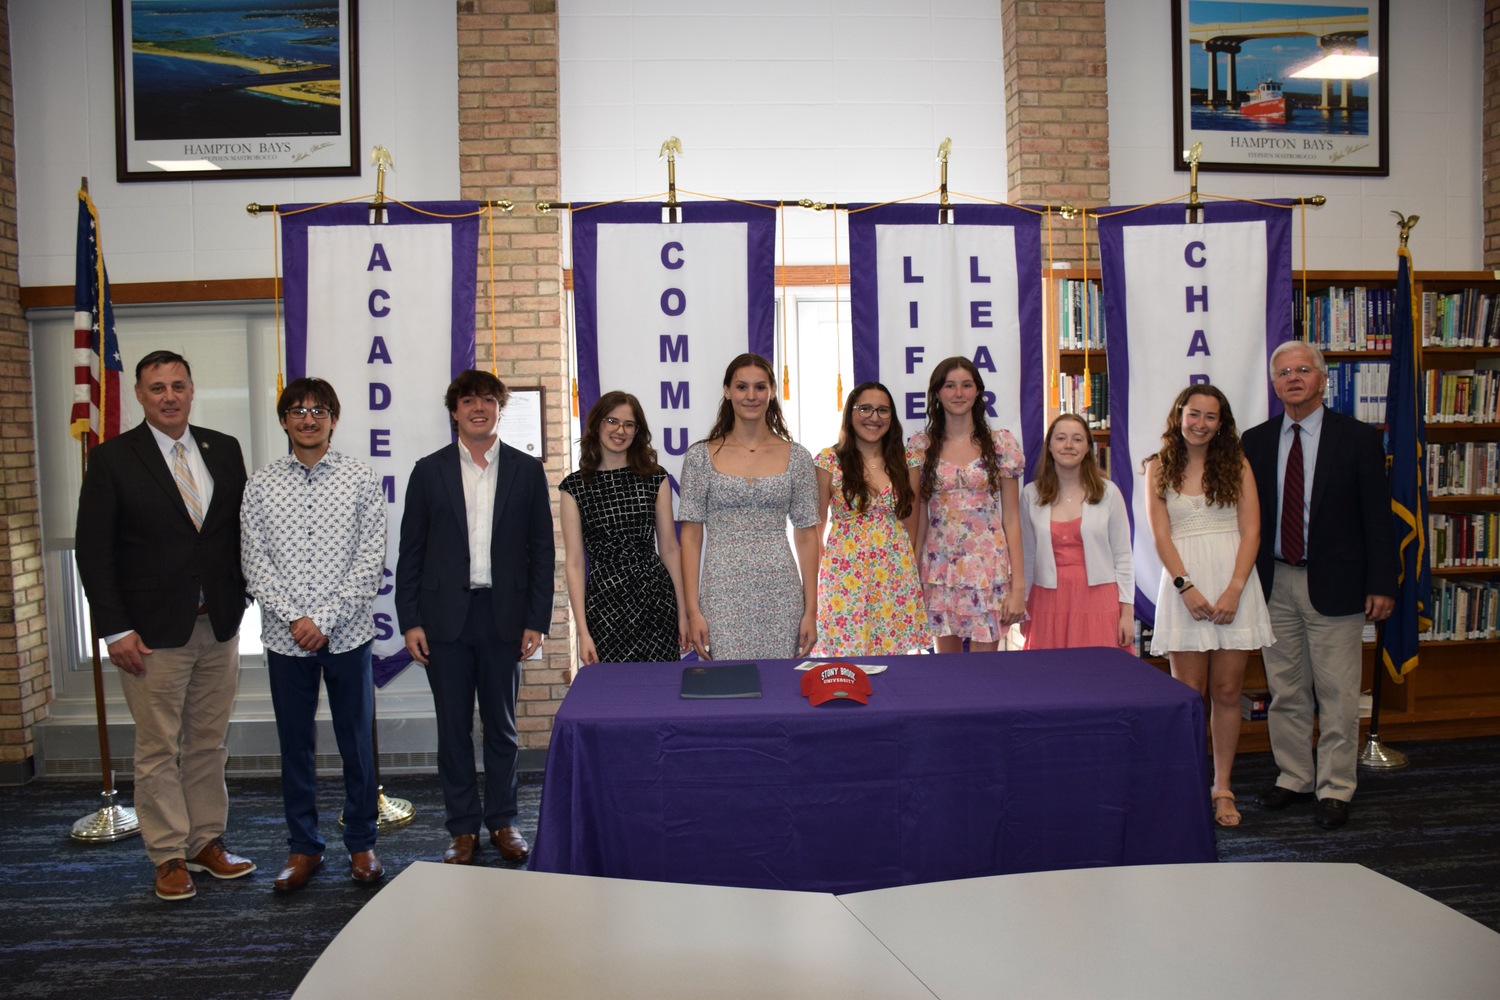 Hampton Bays valedictorian Emily Robinson and salutatorian Samantha Kraycar were among other East End students at the top of their school district's class to be honored by Senator Anthony Palumbo and Assemblyman Fred Thiele during an annual ceremony at Hampton Bays High School May 31.